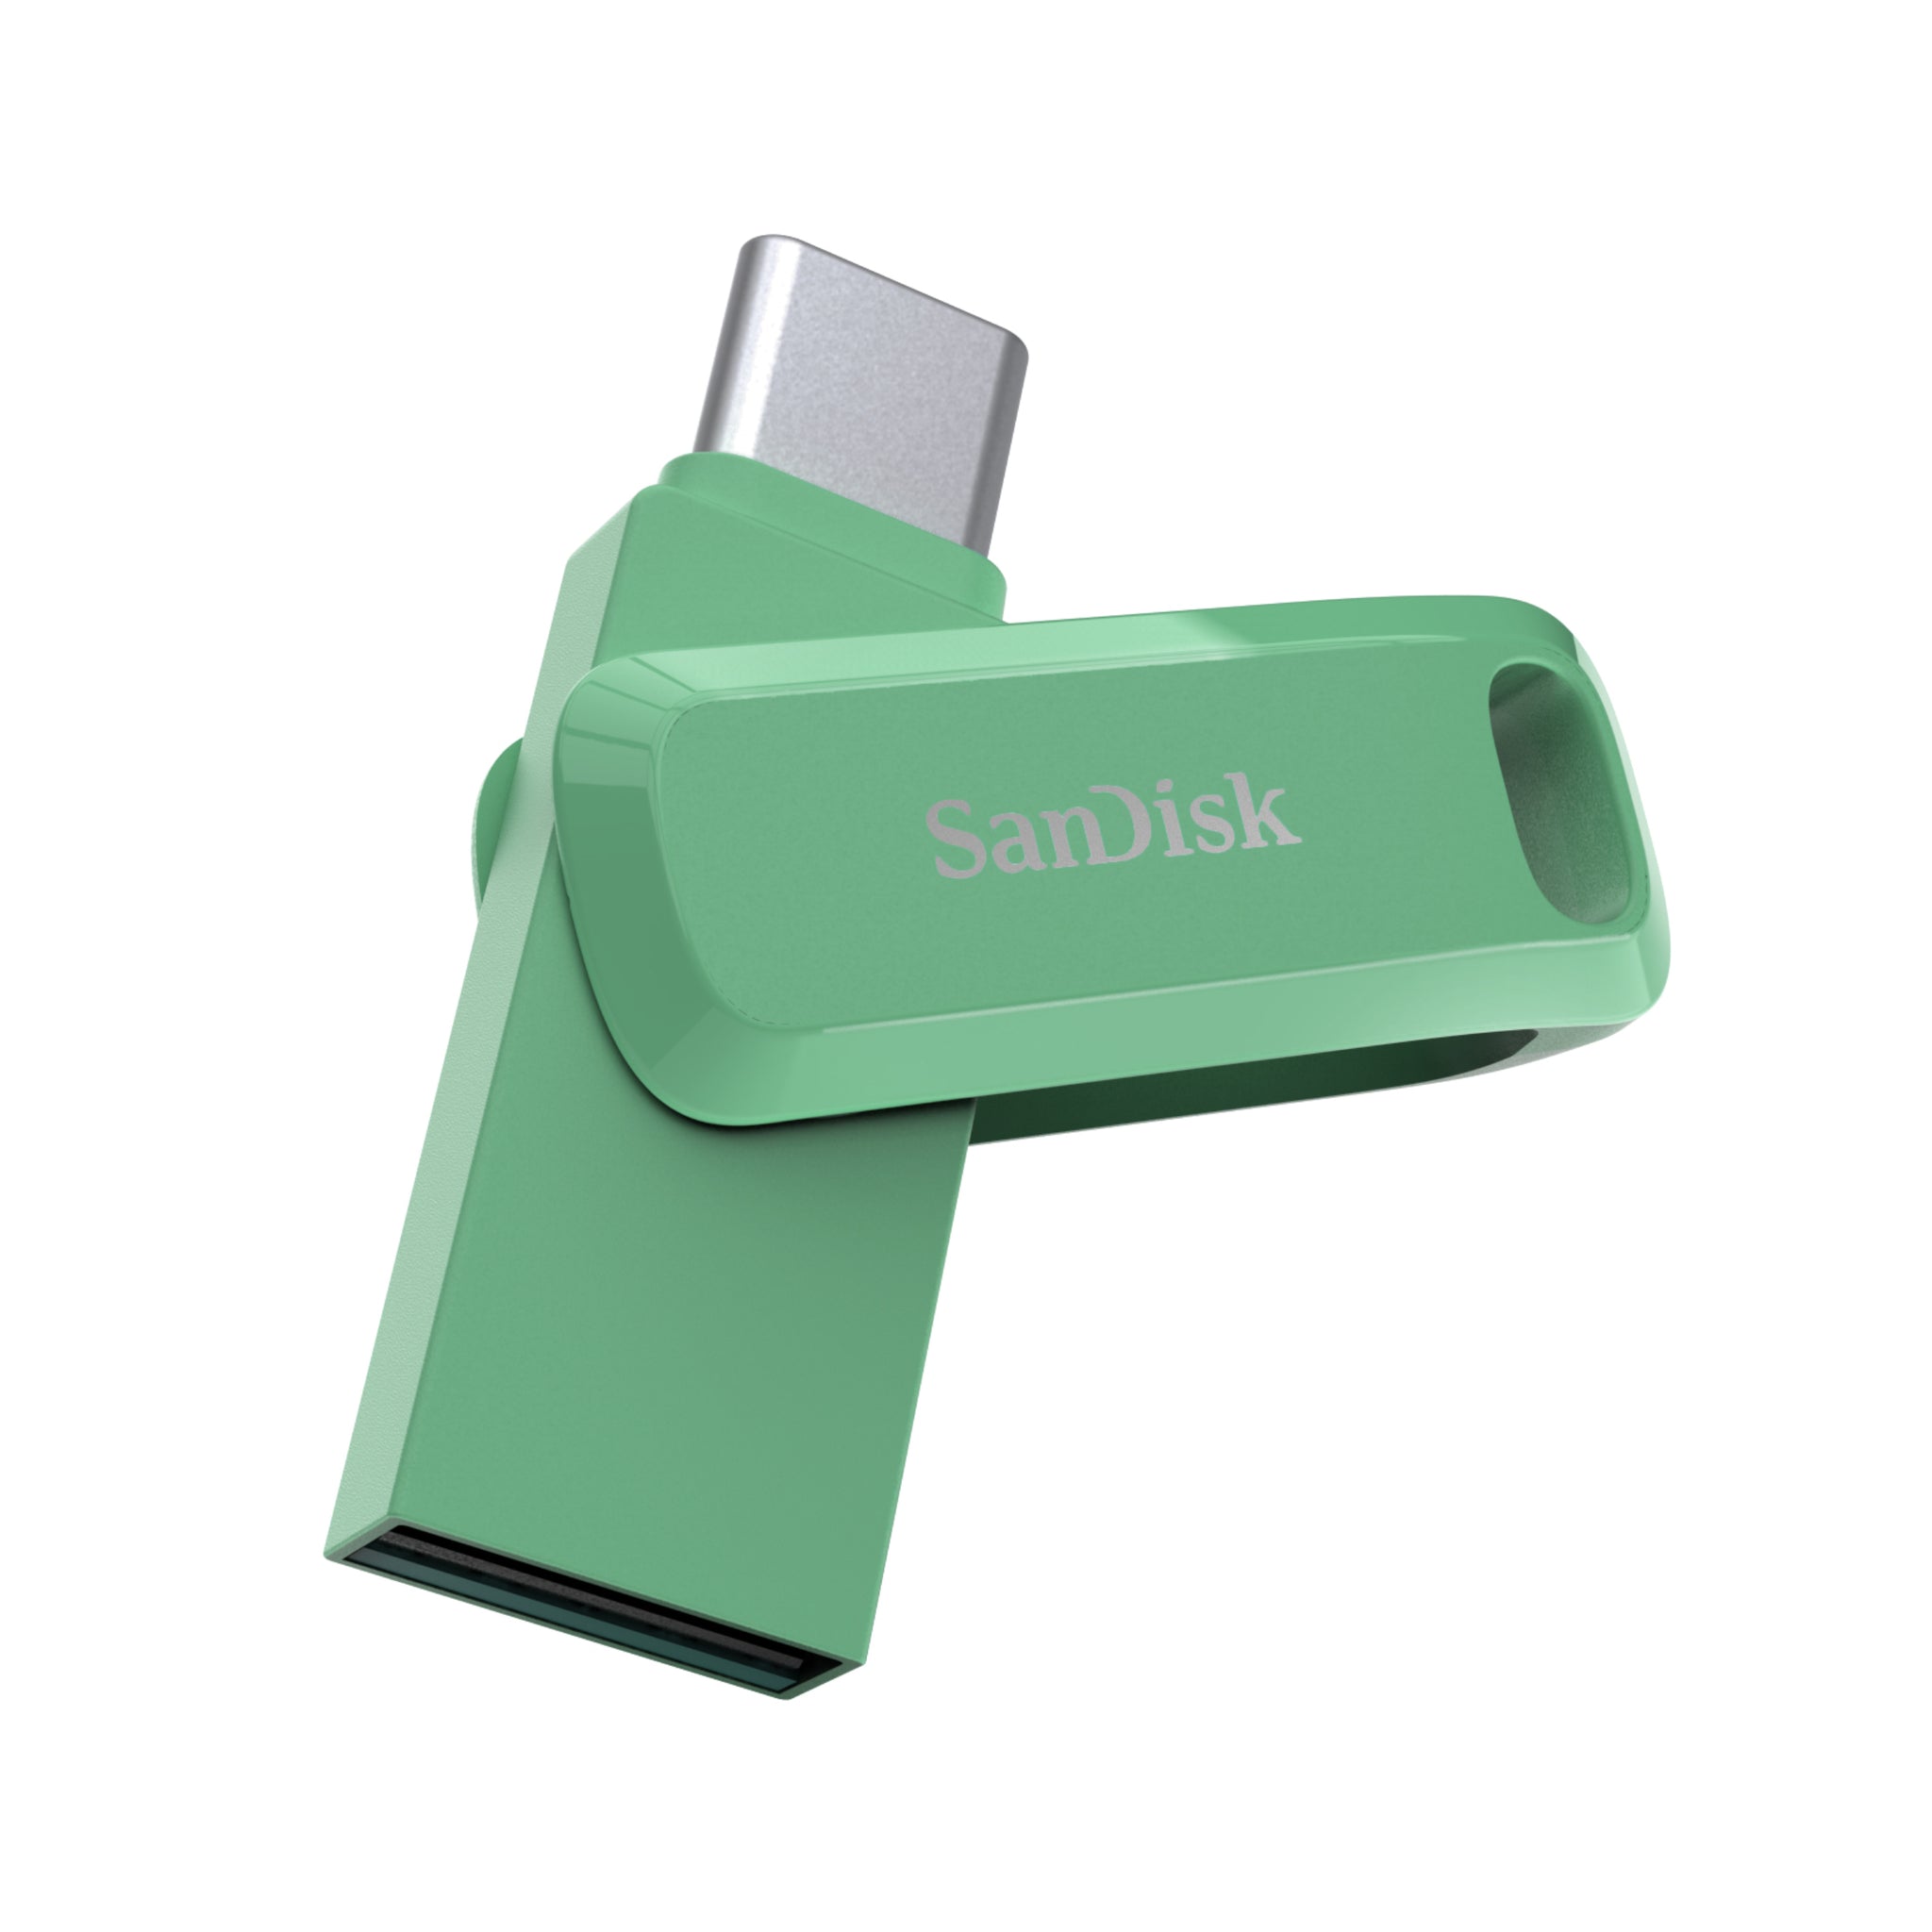 SanDisk Ultra Dual Drive Go USB Type-C OTG USB 3.1 Flash Drive for Android Smartphone, Computers & Tablets (Absinthe Green/ Navagio Bay/ Lavender))-Data Storage-futuromic